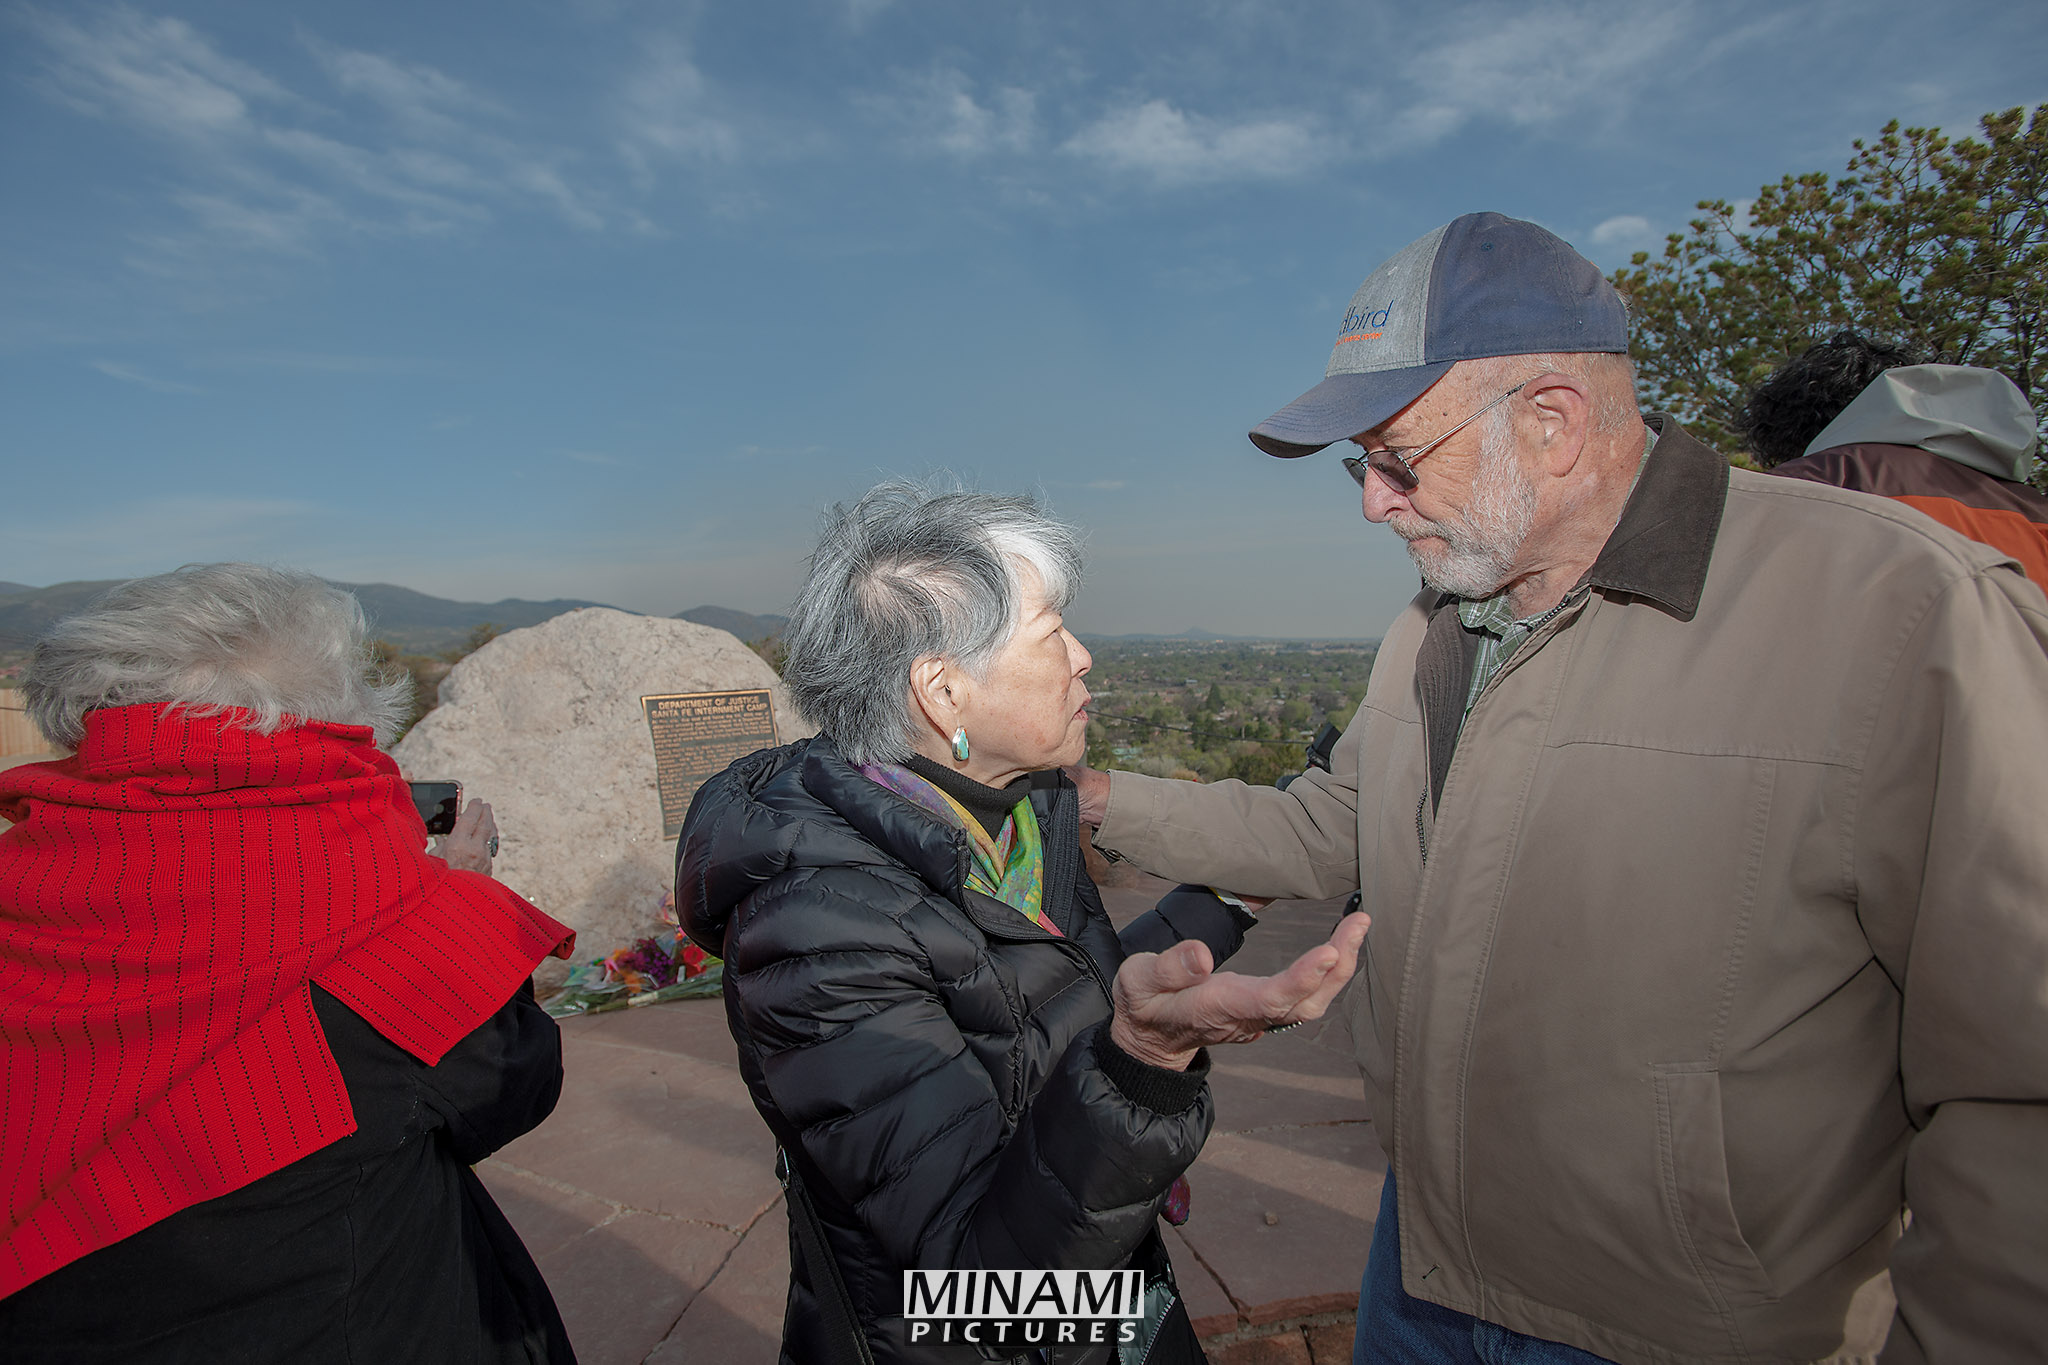 Gail Okawa, professor and historian, speaks with David Mason who has confessed to throwing cacti at Japanese prisoners as a three year old Santa Fean during World War II.